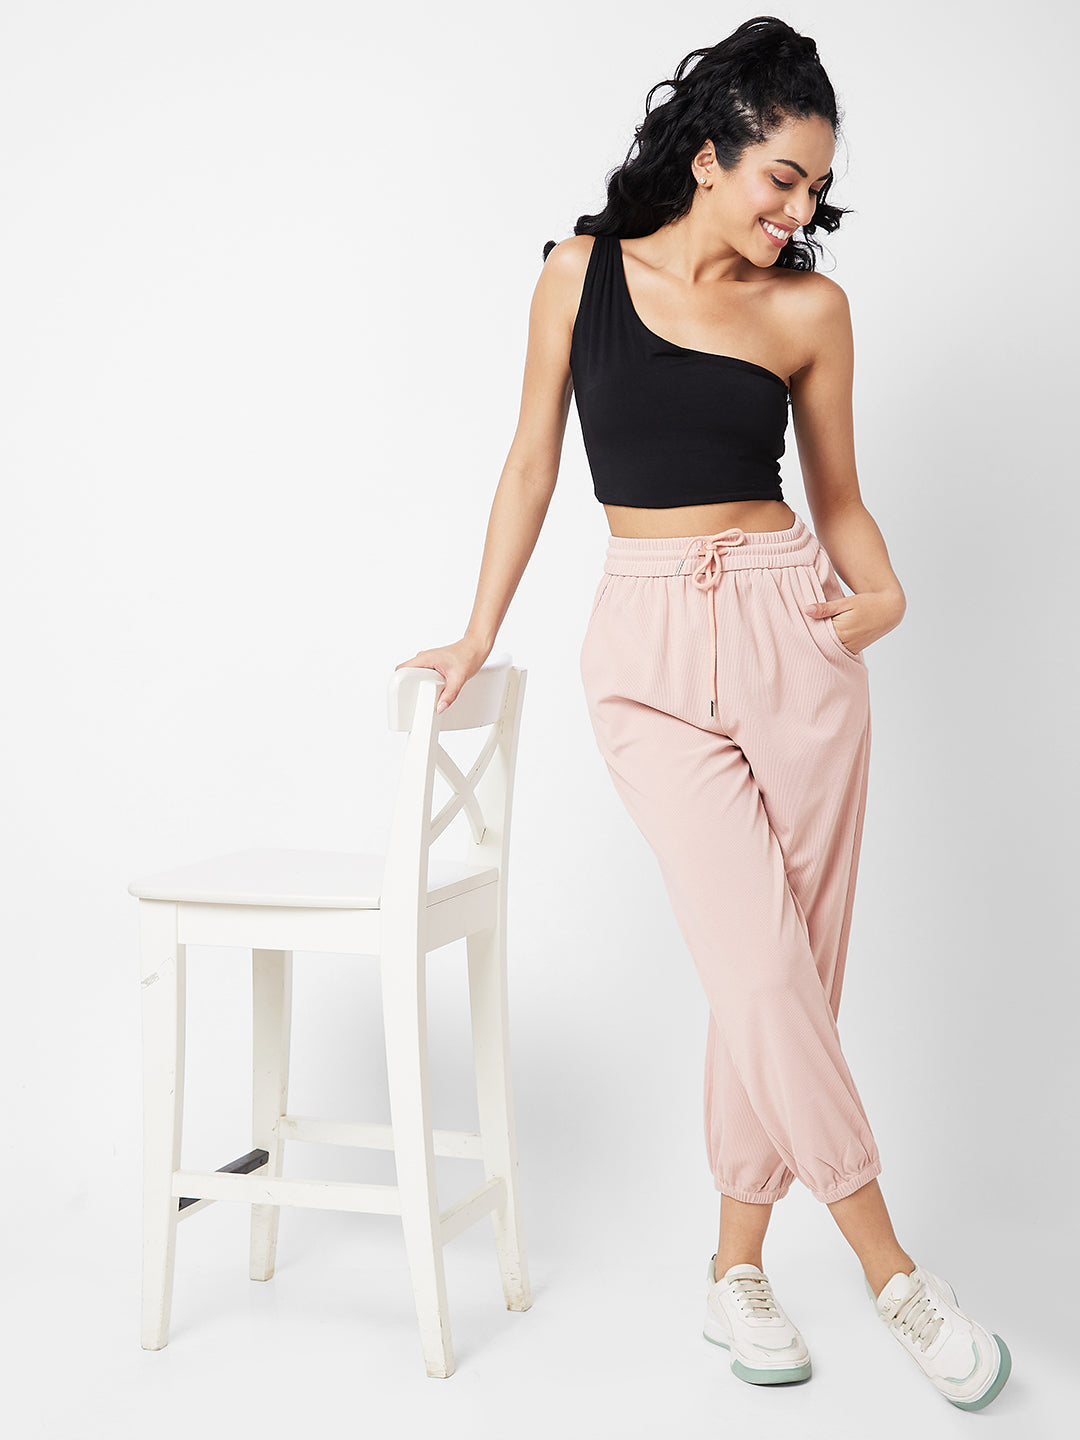 Spykar Jogger Fit Pink Knits Track Pants For Women